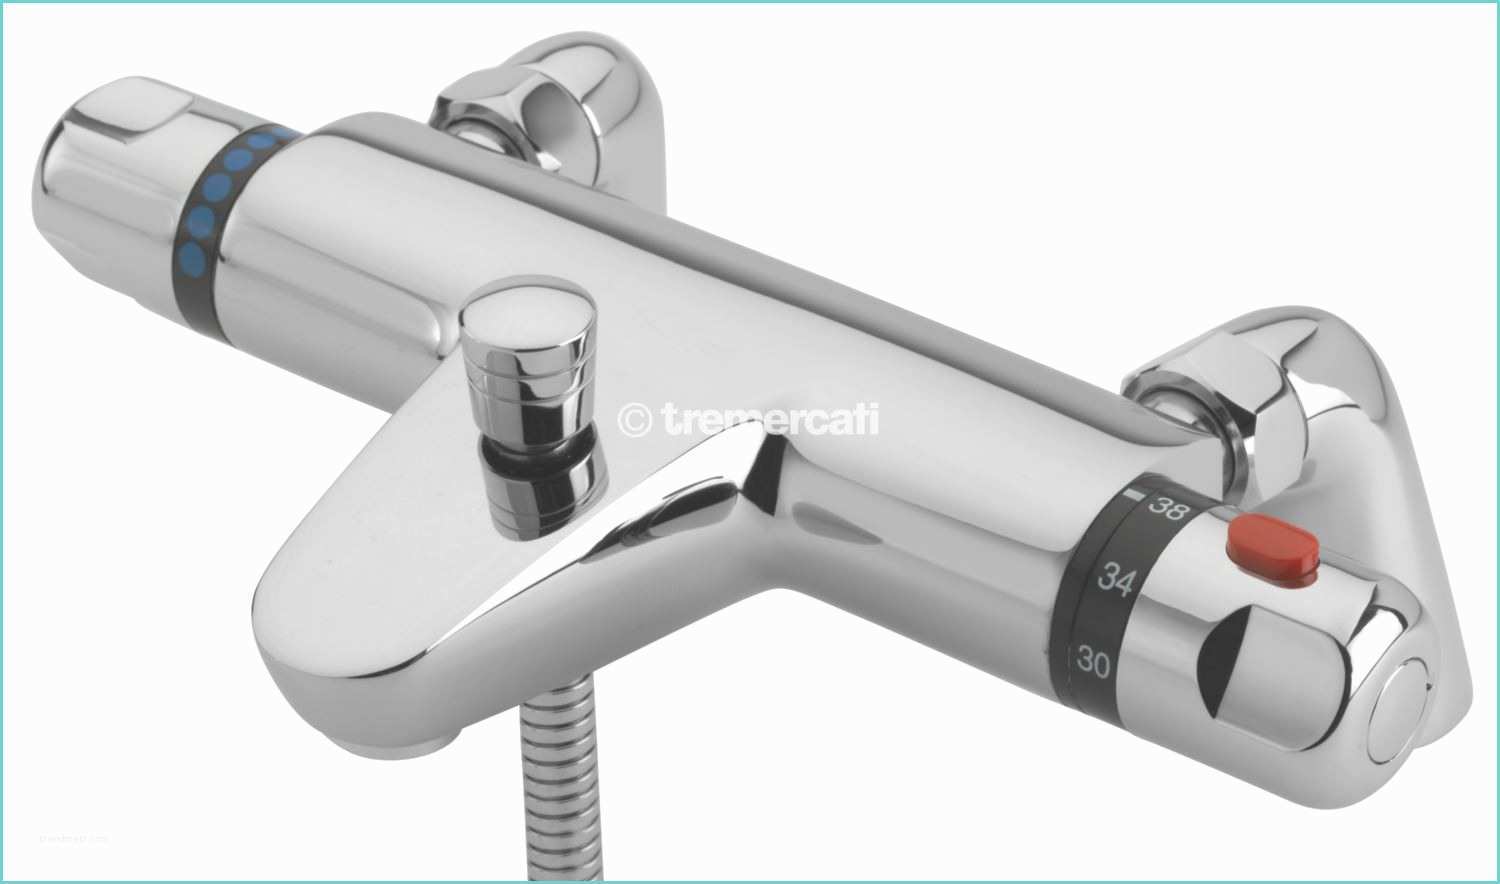 Thermostatic Shower Mixer Taps Tre Mercati thermostatic Deck Mounted Bath Shower Mixer Tap